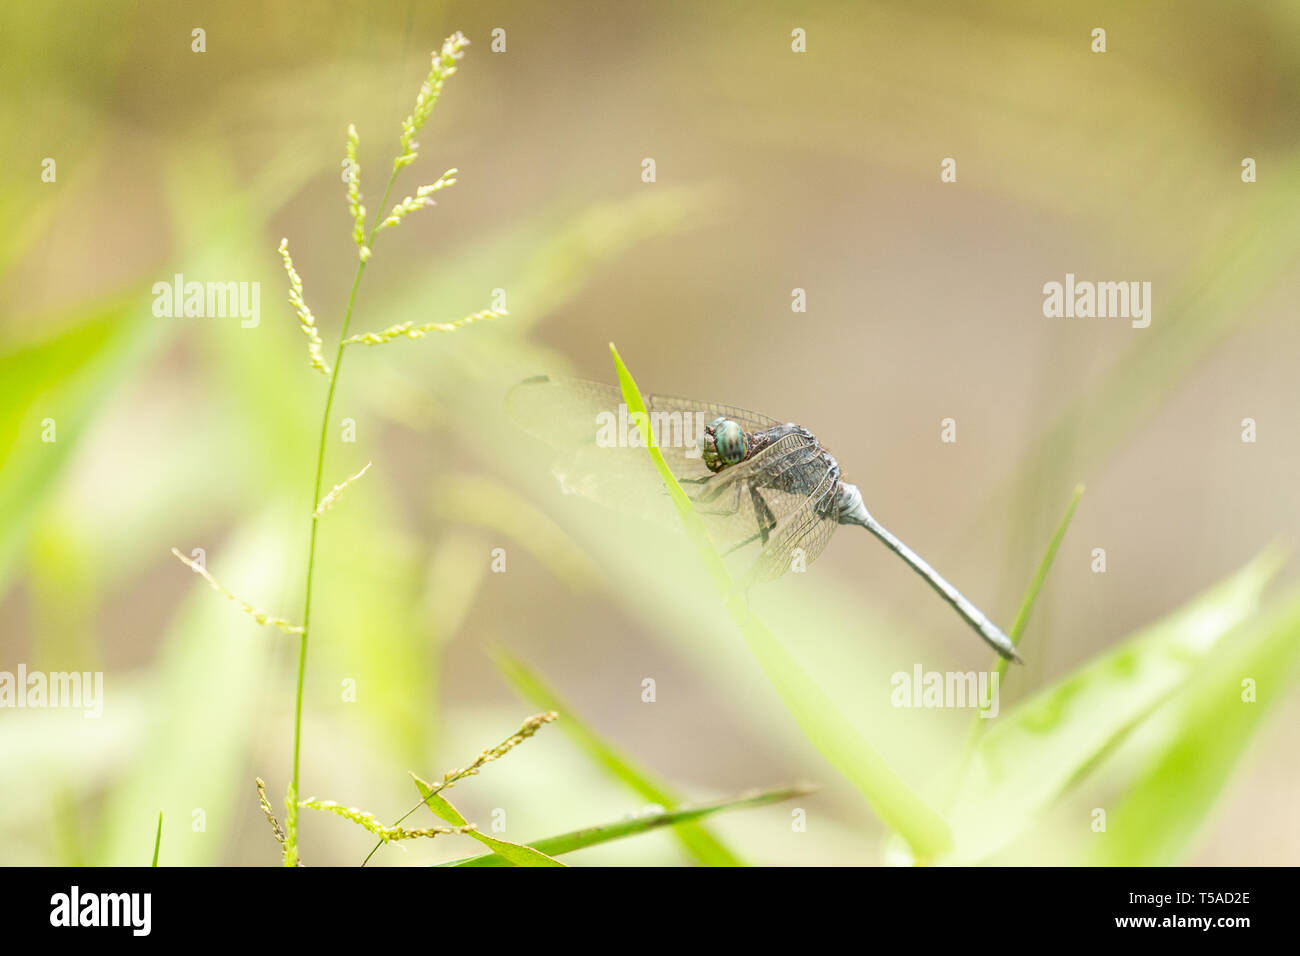 dragonfly perched on grass Stock Photo